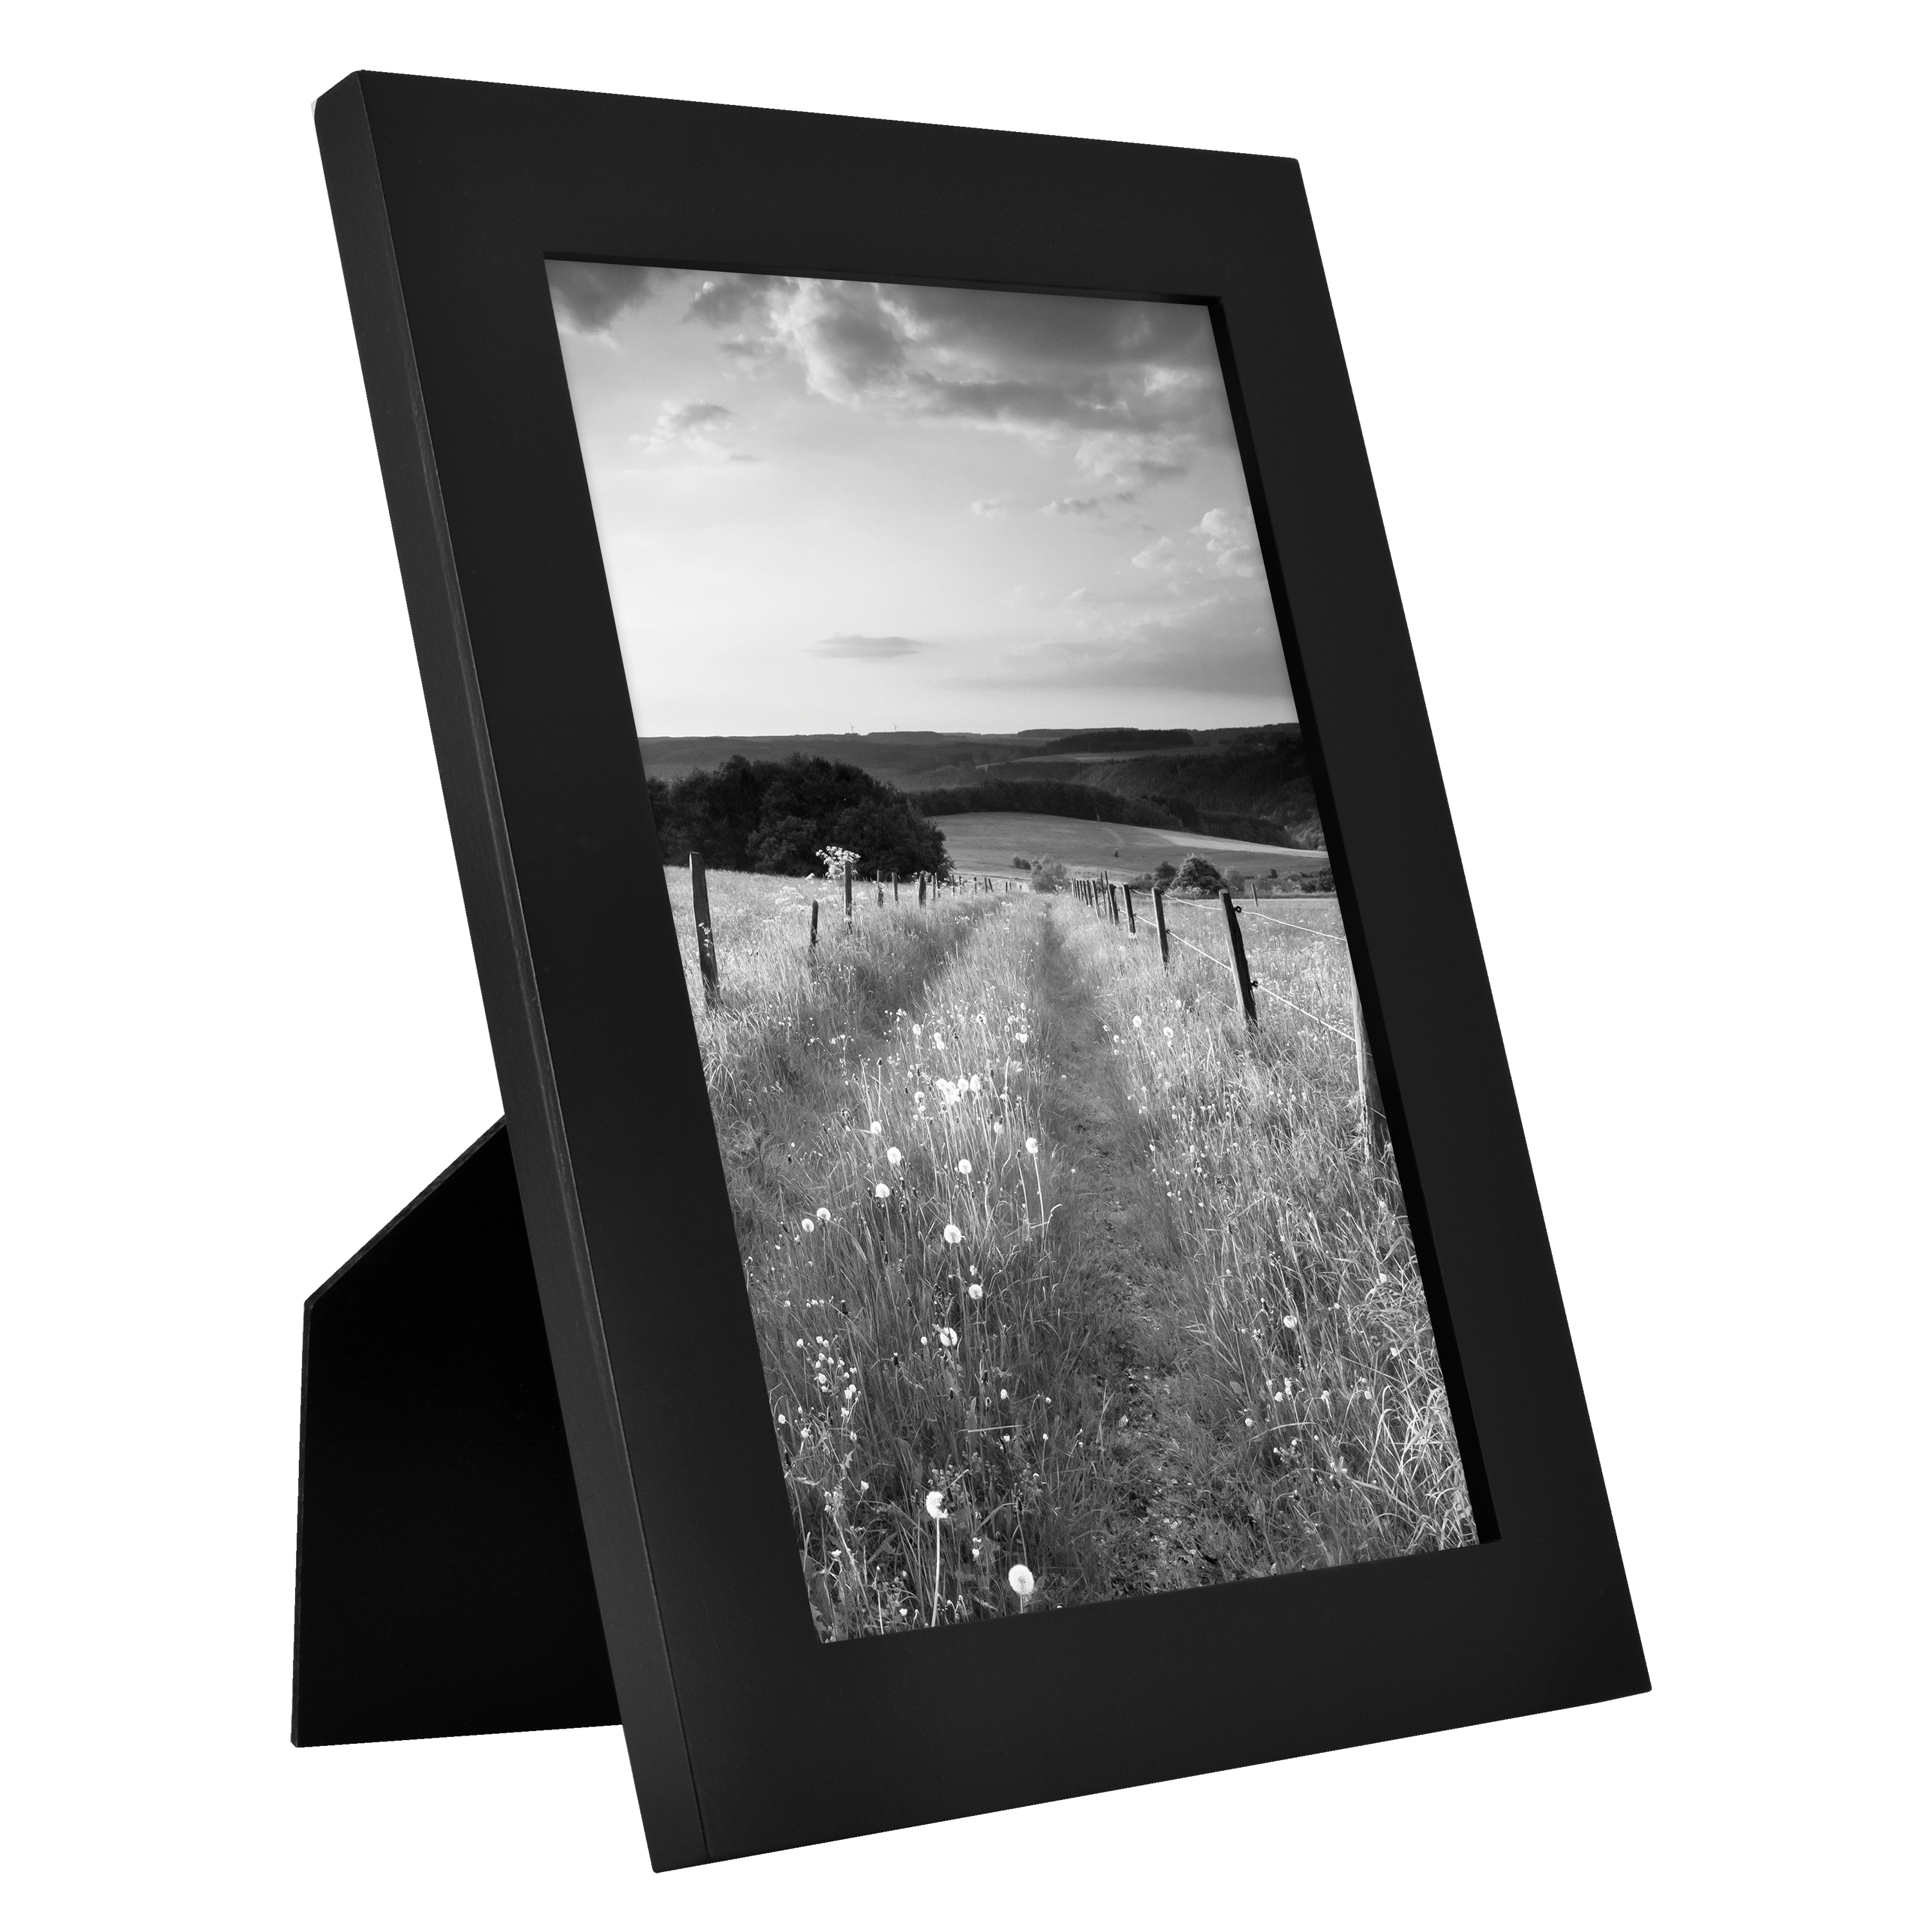 Gallery Flat-Top Pine Wood Picture Frame Set, Set of 5 - image 3 of 6